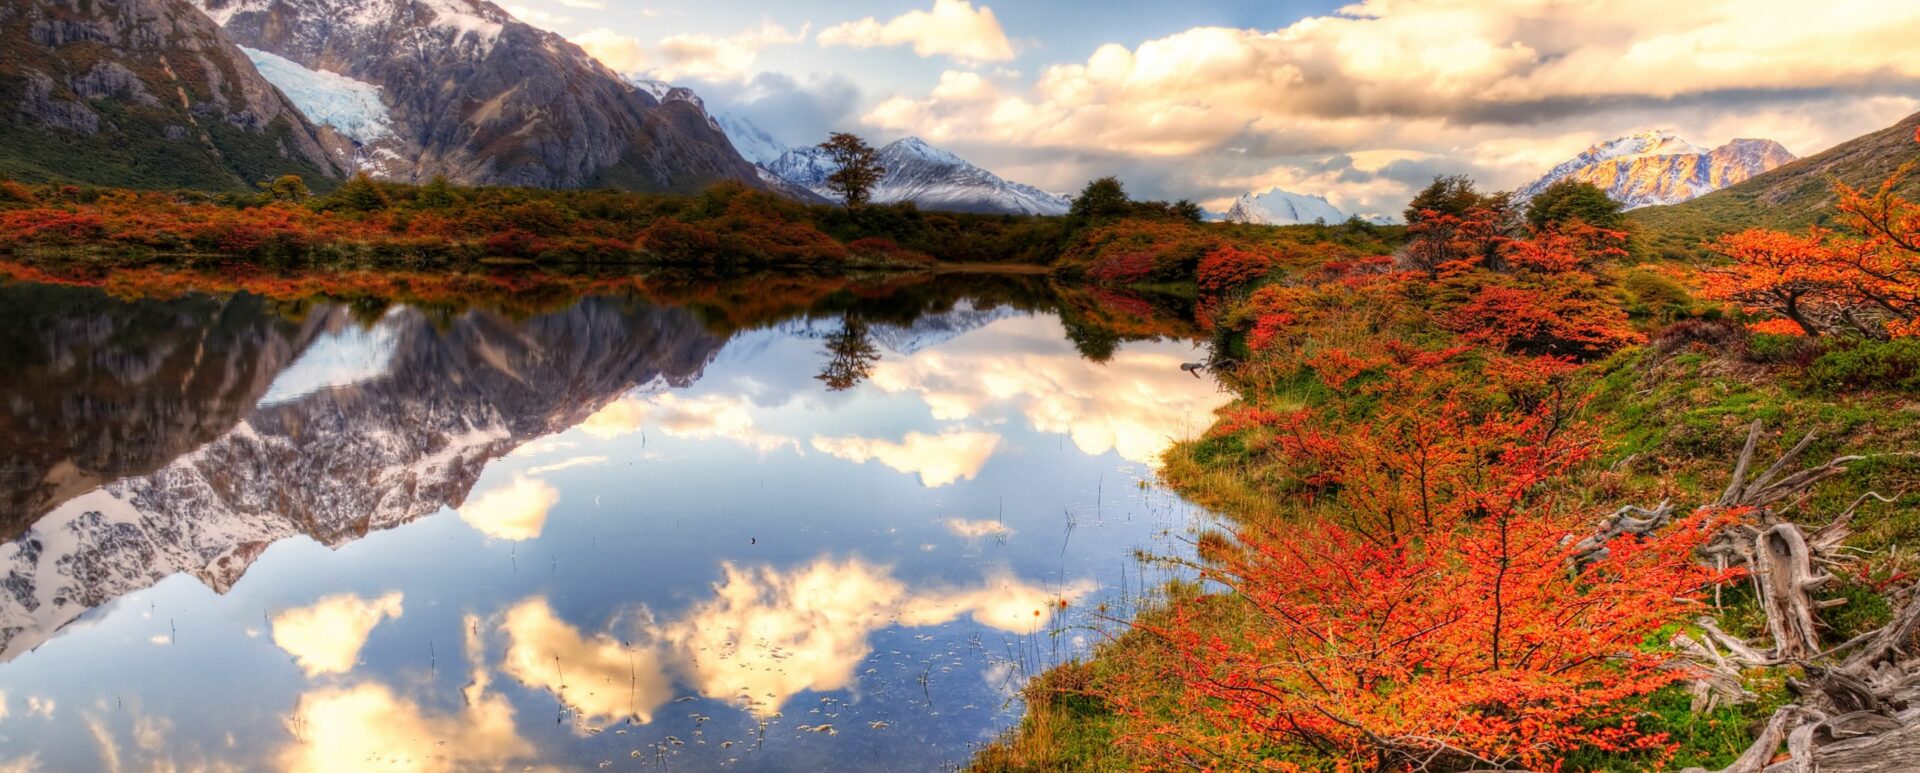 Autumn holidays in Patagonia